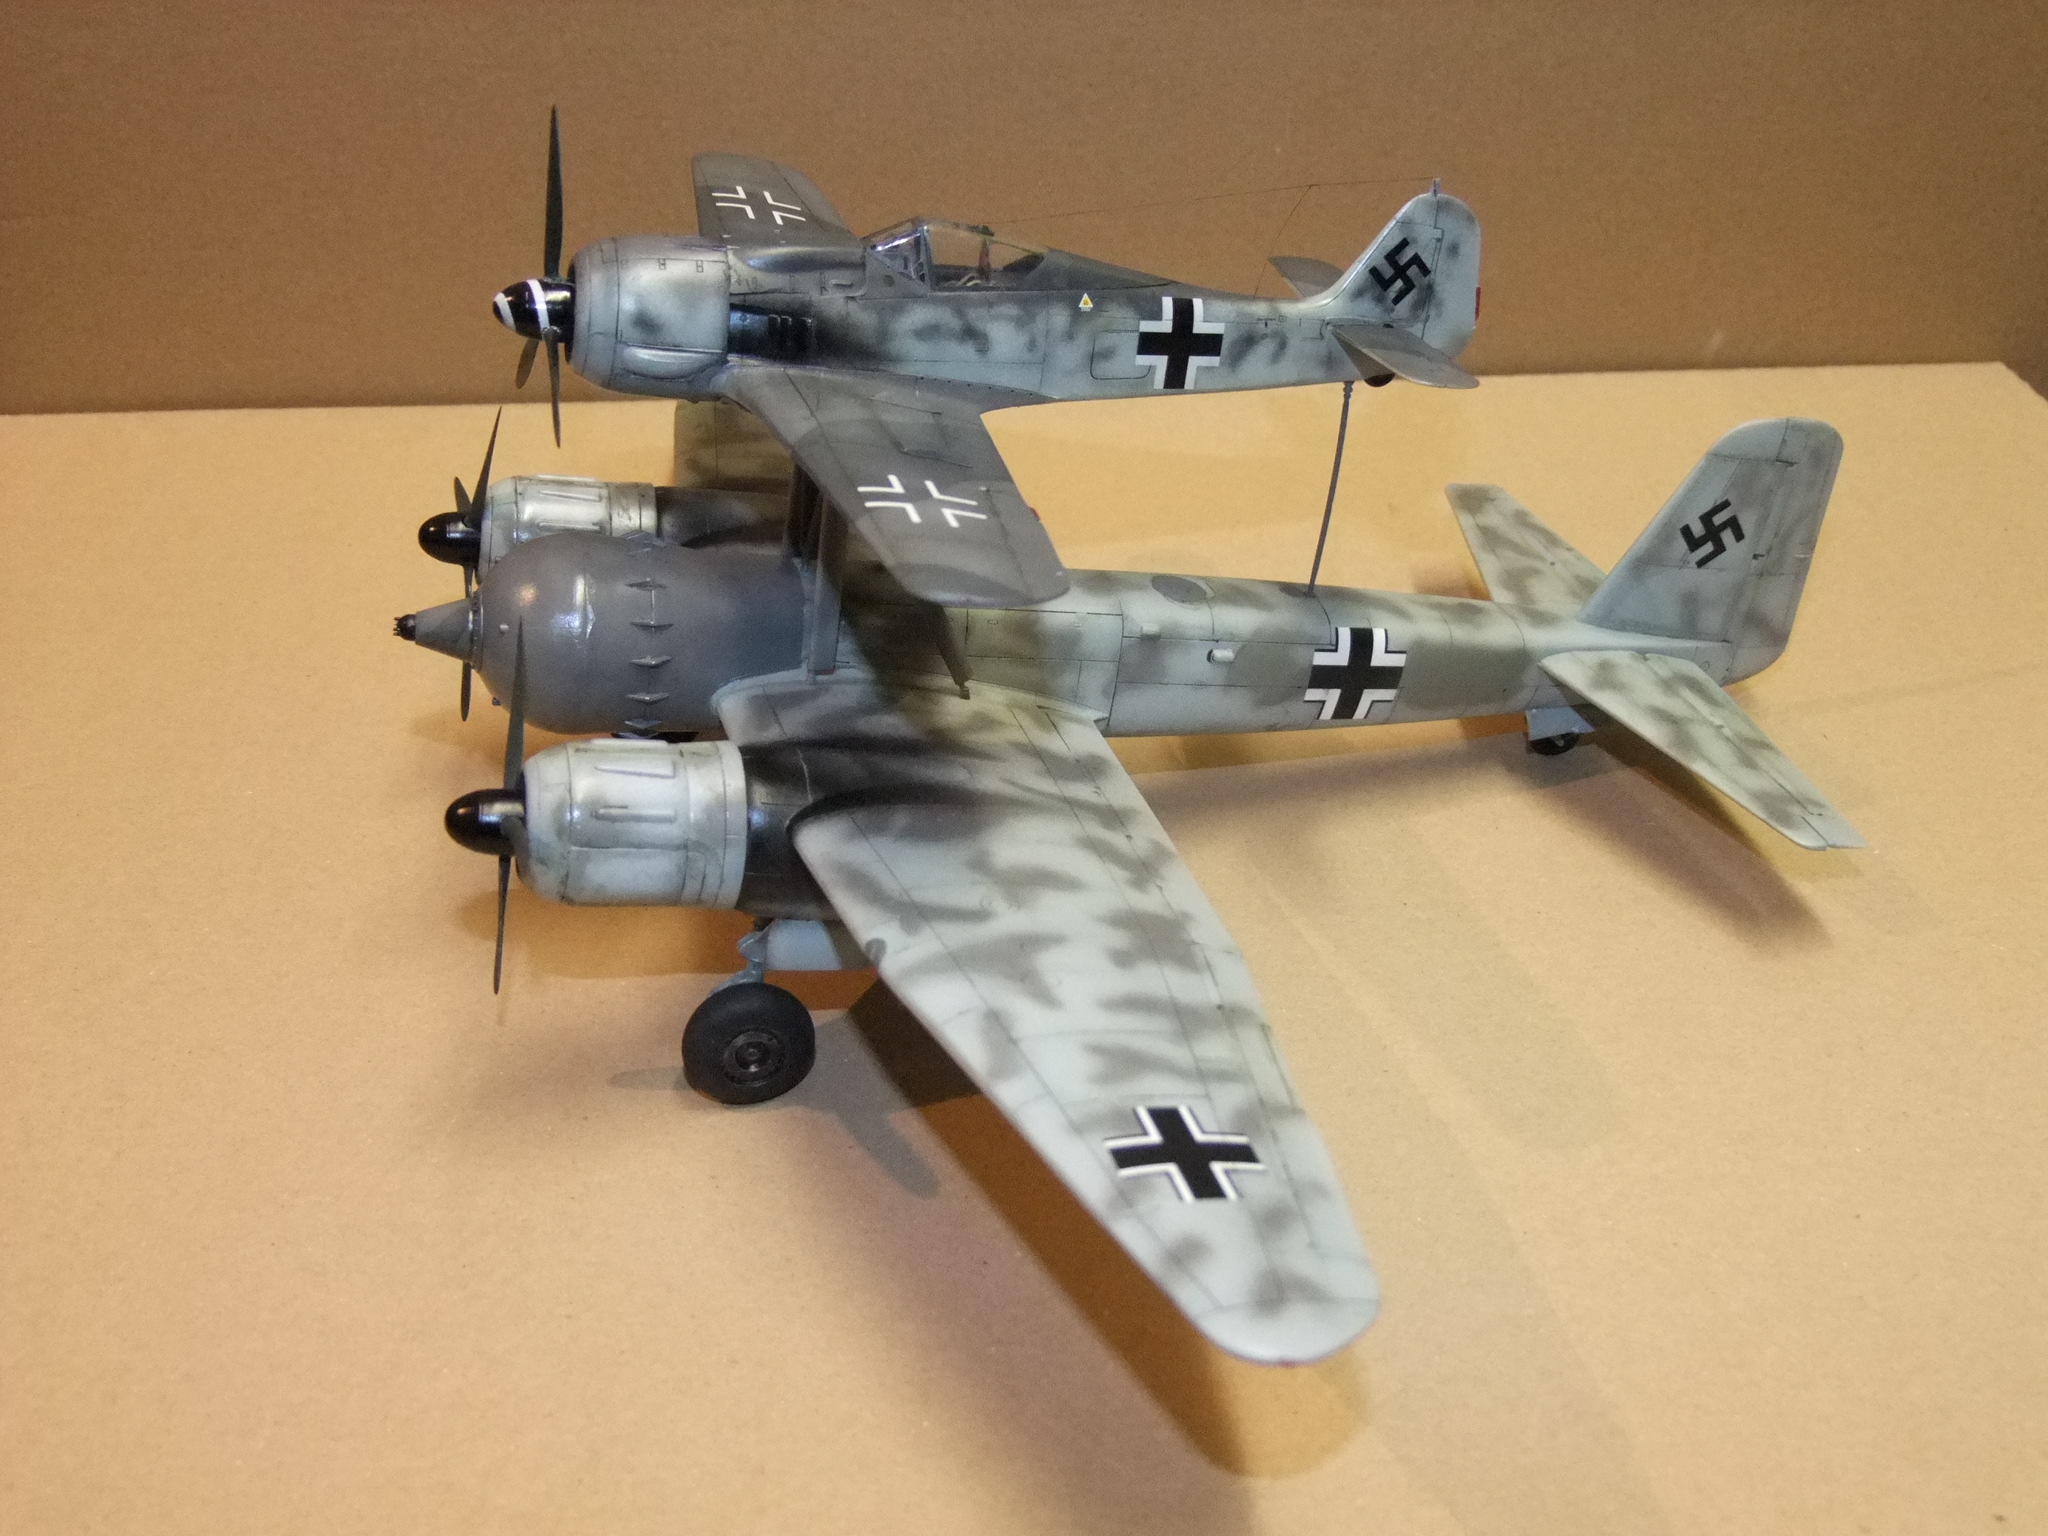 Dragon 1:48 Mistel JU88 G-1 with FW190 A-8 - Ready for